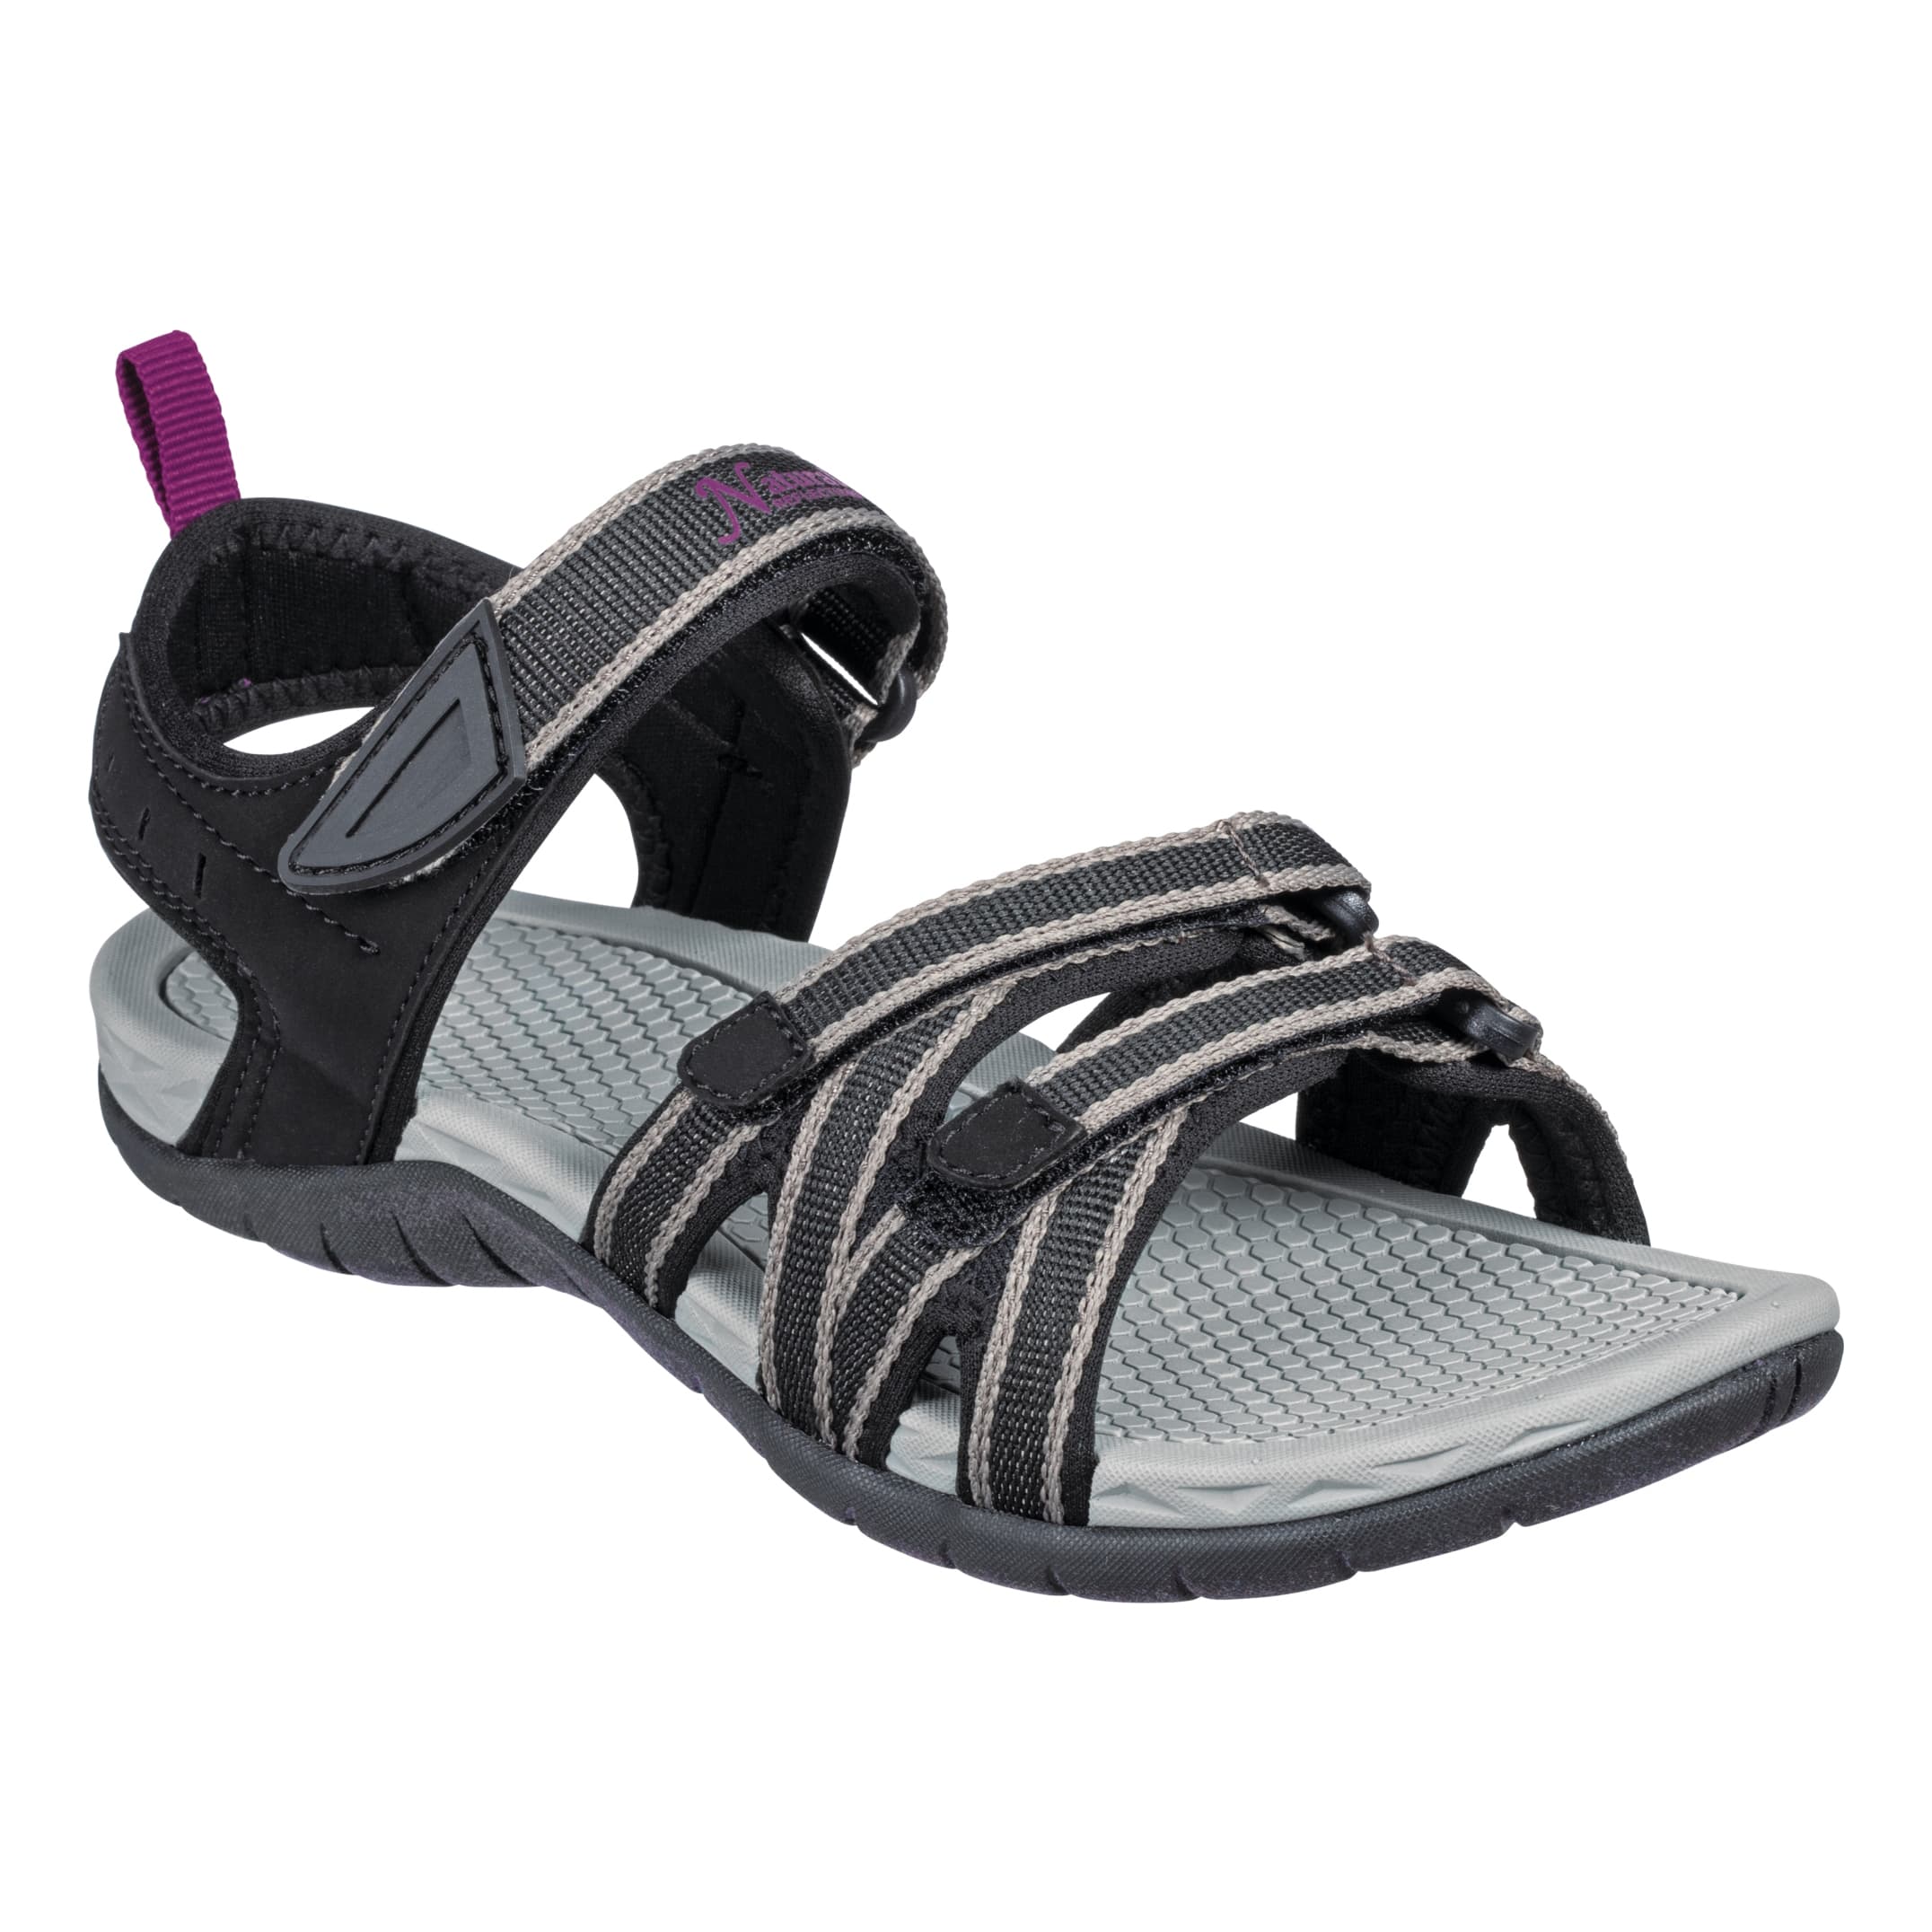 Natural Reflections® Women’s Cape May Sport Sandals - Black